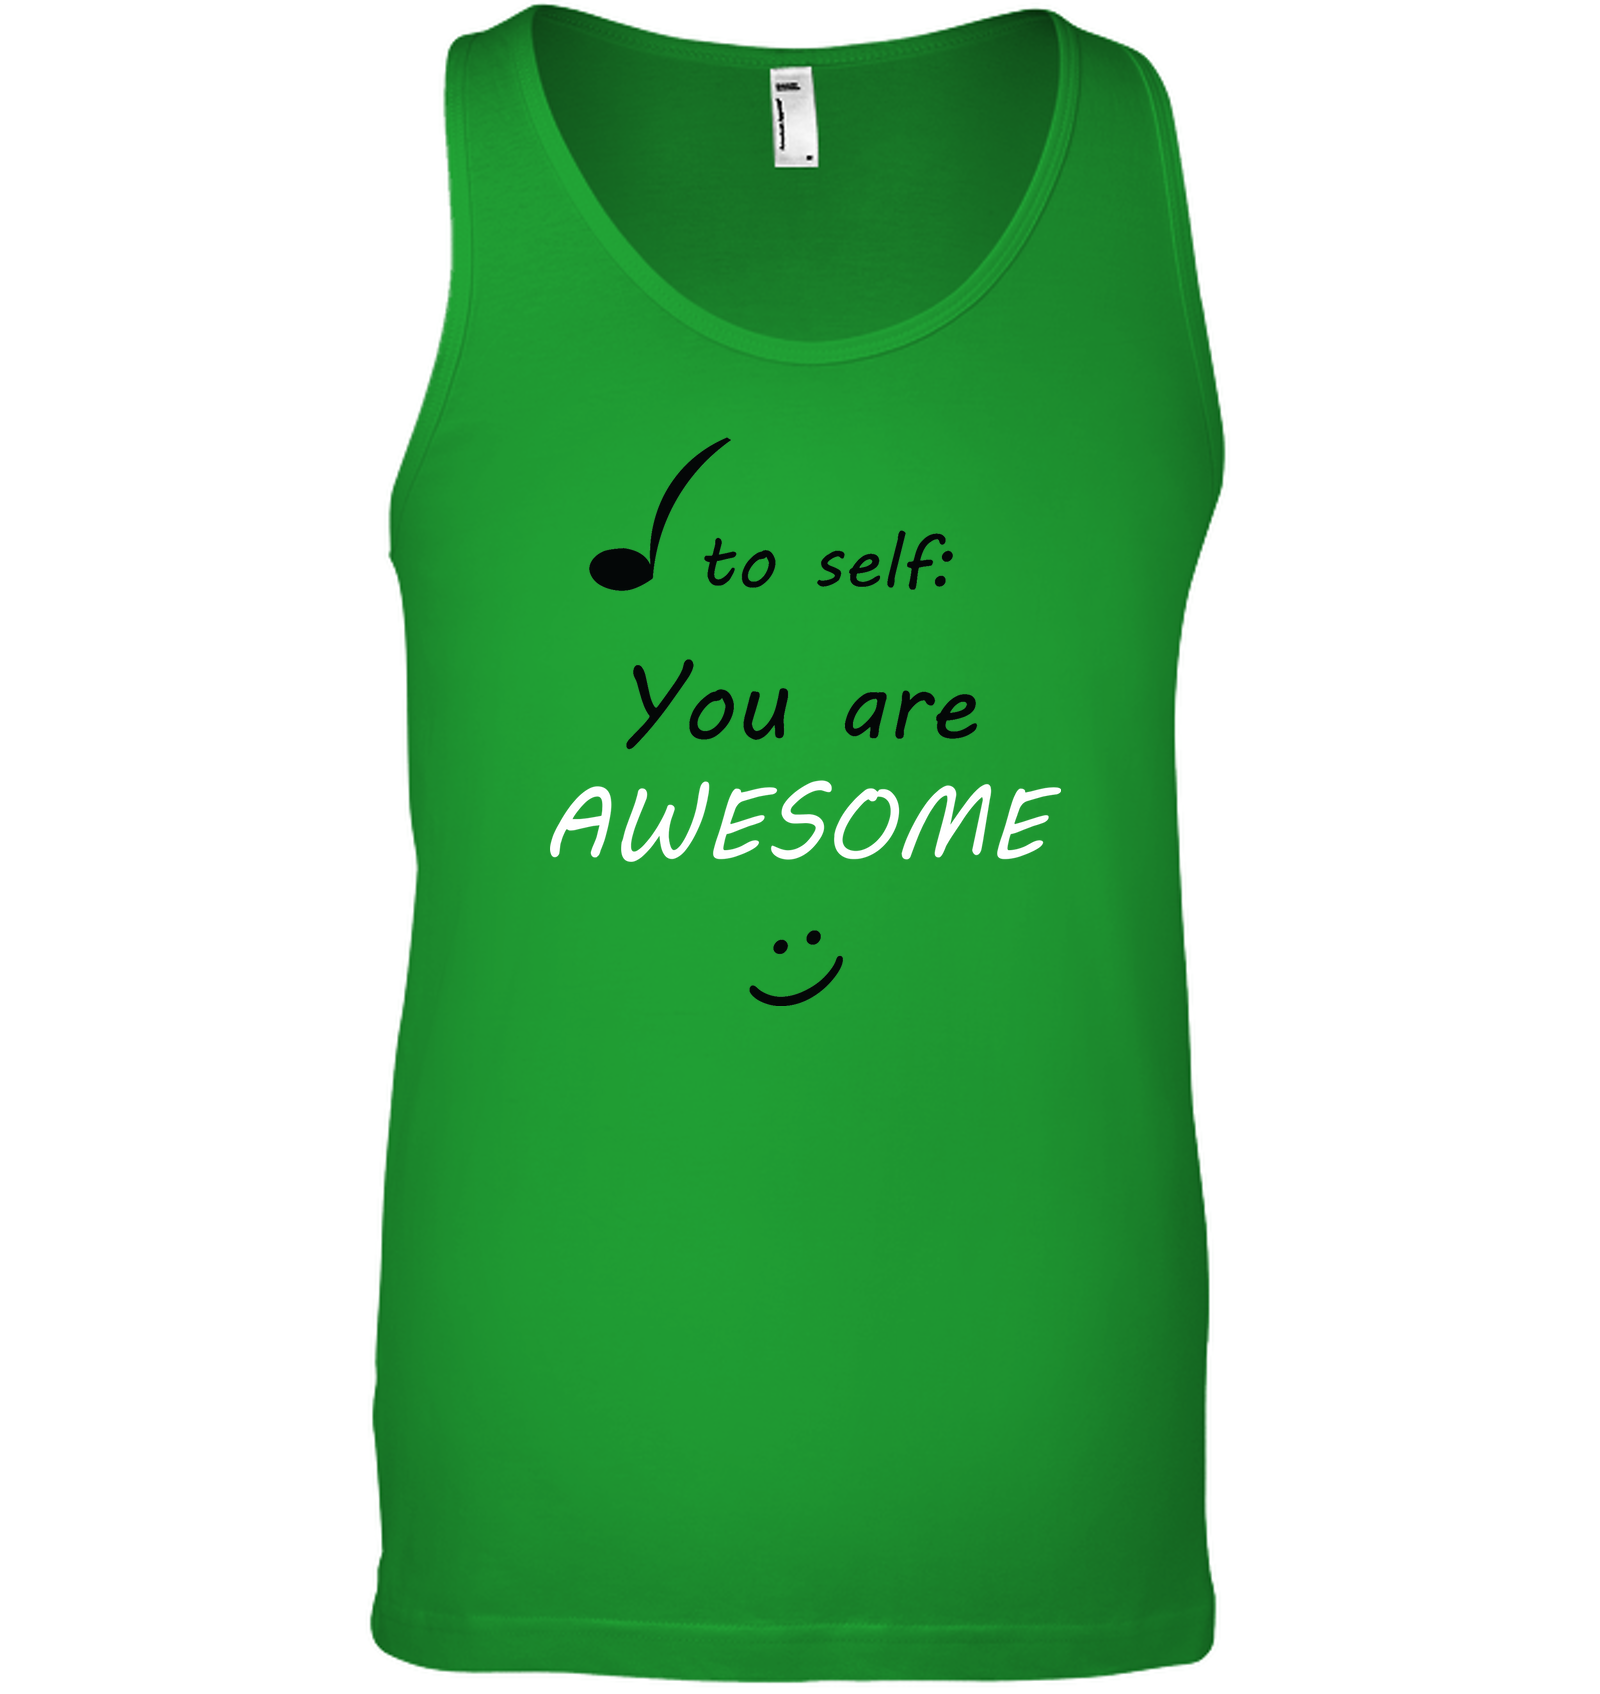 Note to Self, You Are Awesome - Bella + Canvas Unisex Jersey Tank